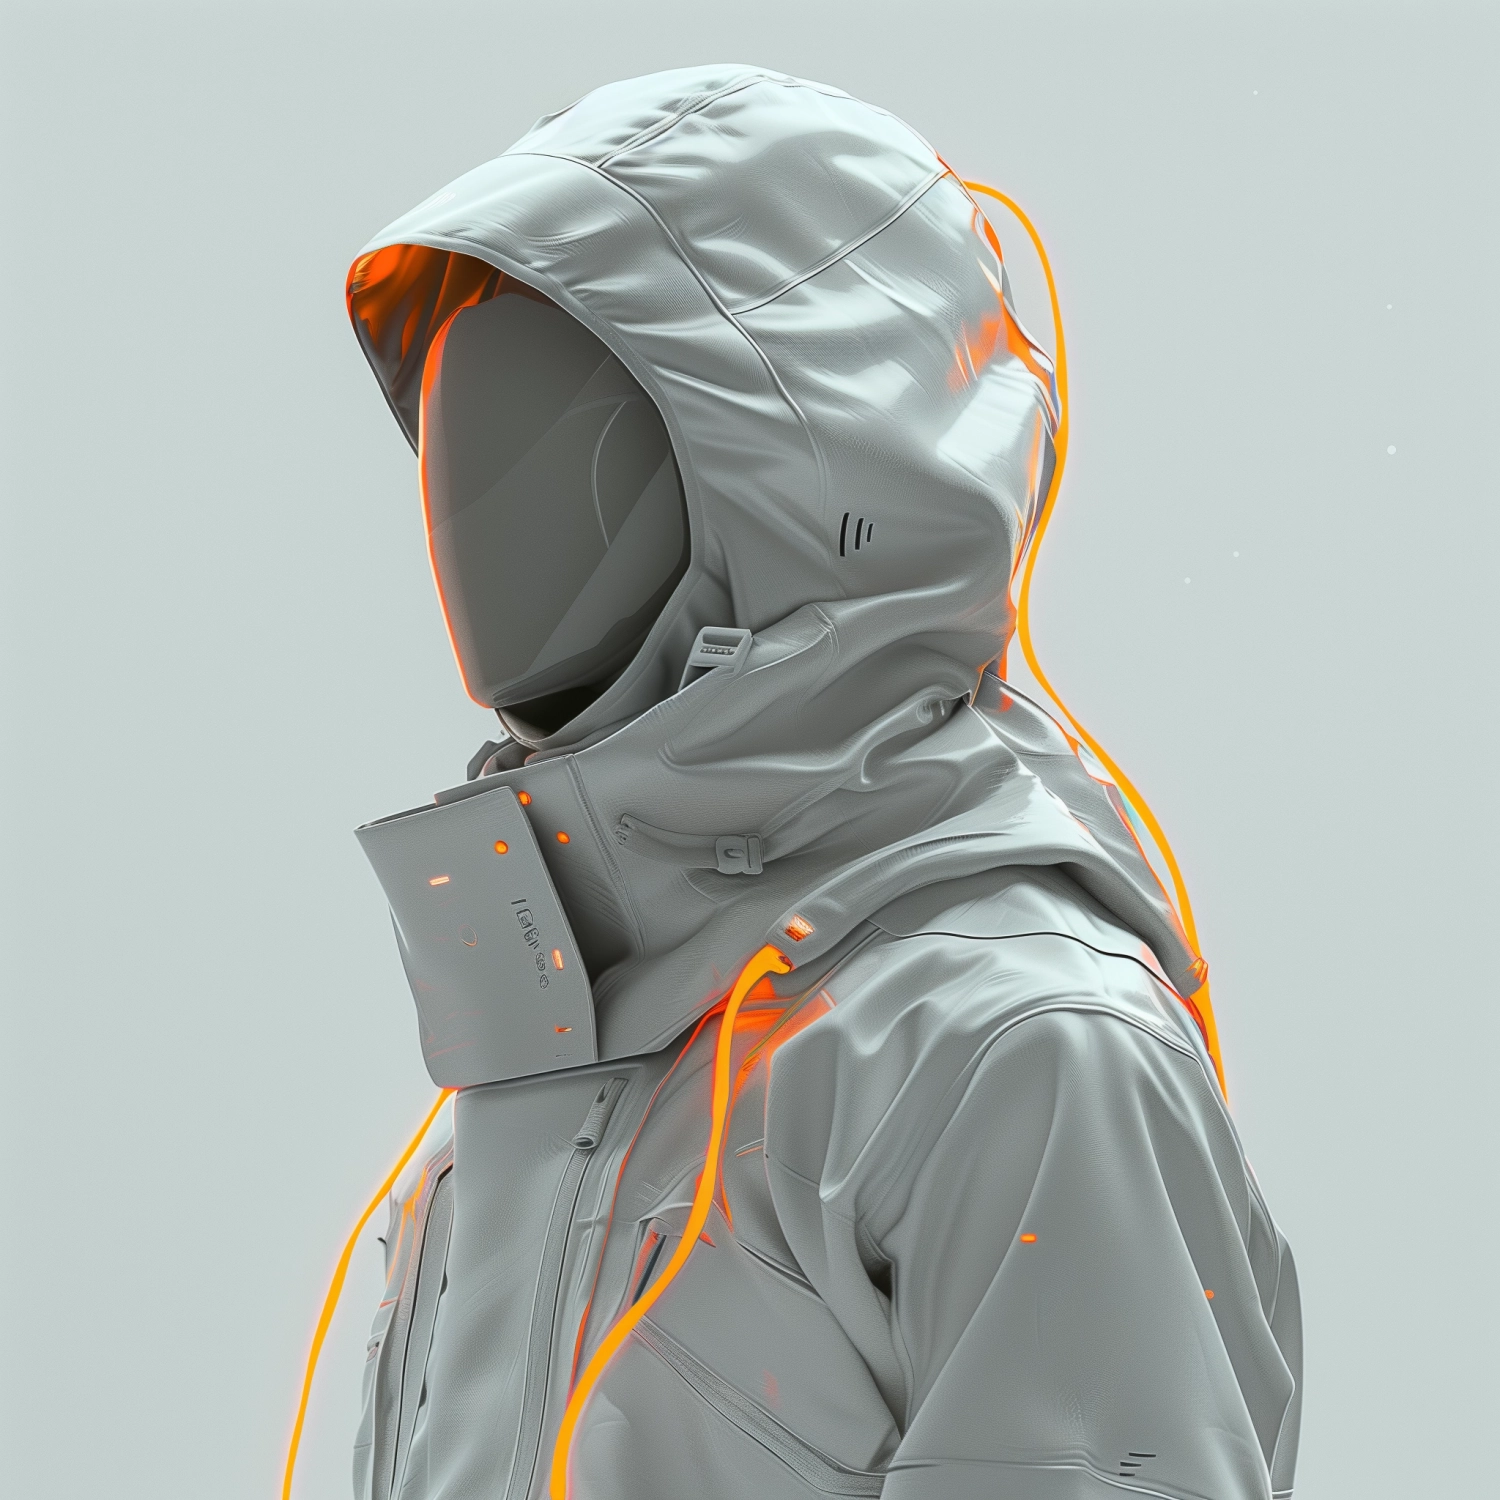 futuristic profile picture, turned away, no face, minimalistic off white rain jacket, orange accents, shadows, white male, side angle, white background, render, realism, 3d